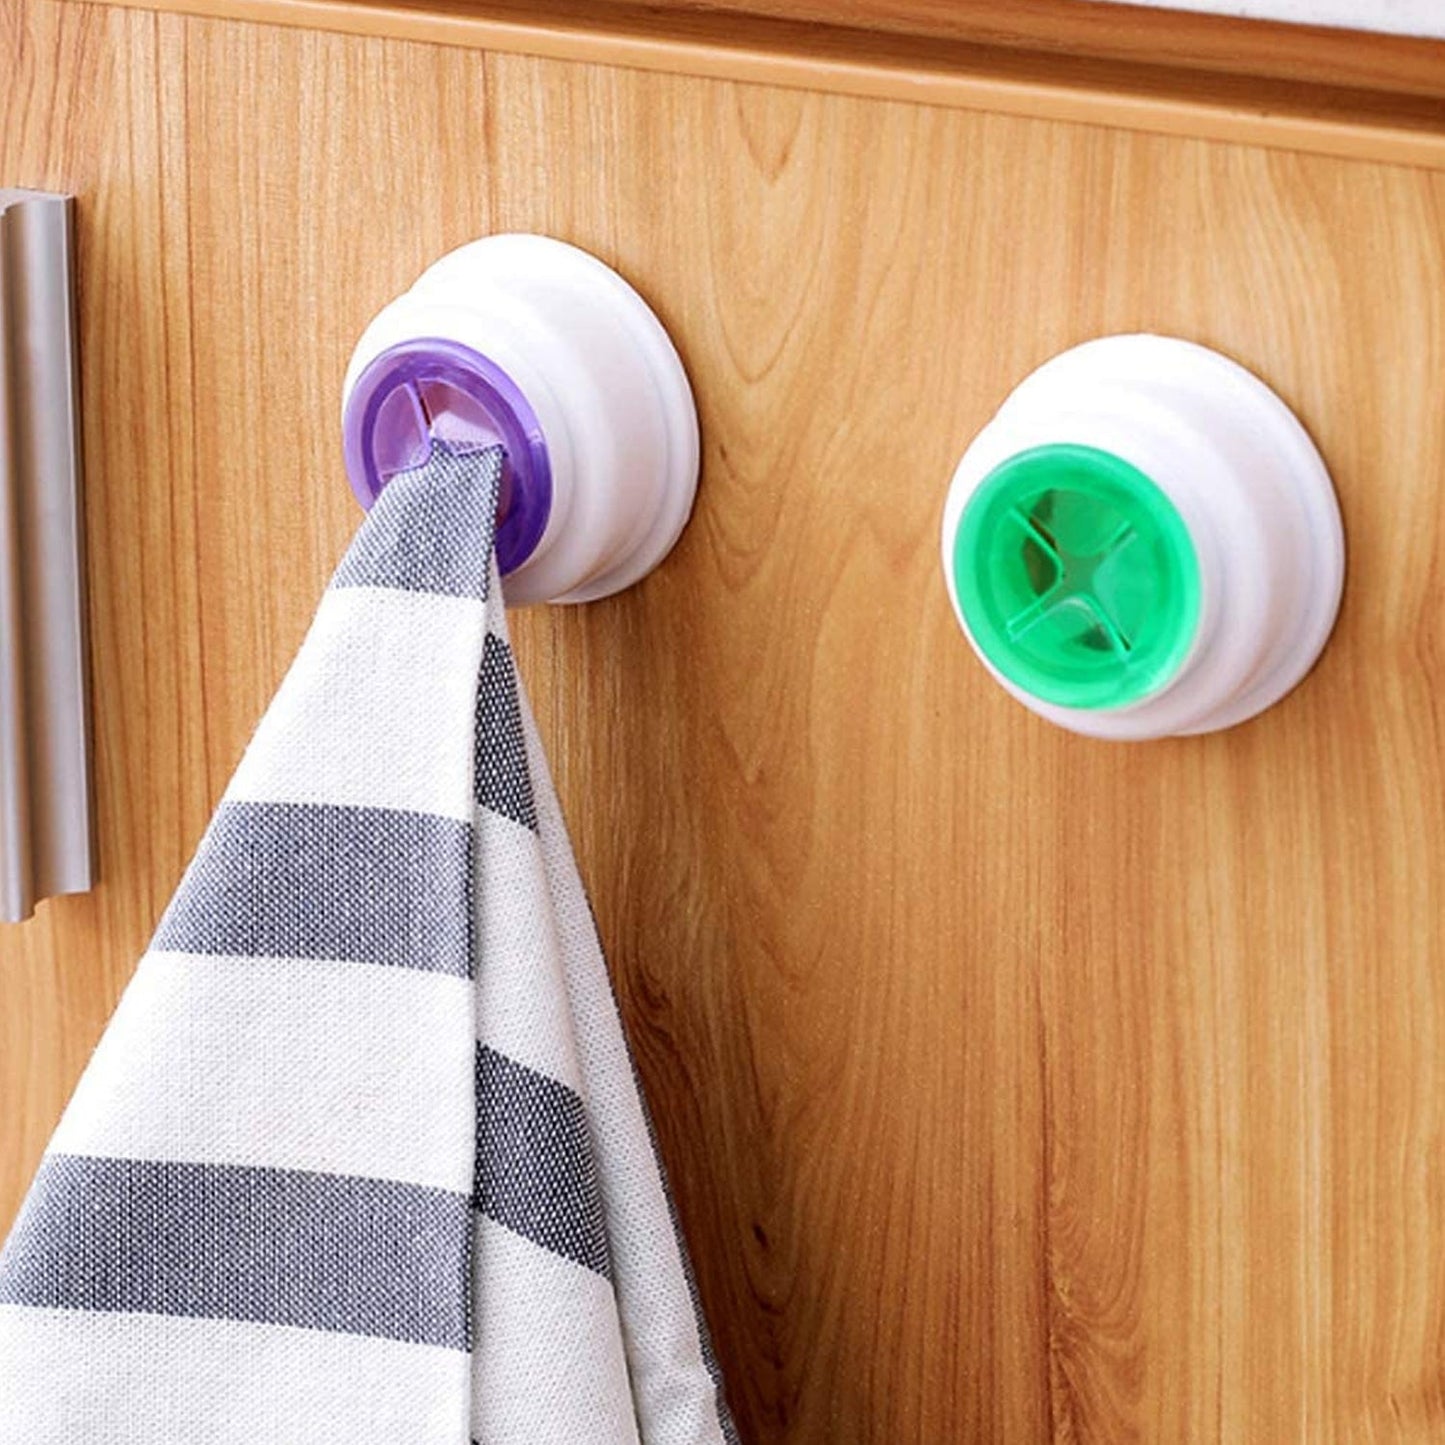 Towel Holder for hanging towels and easy take-in 4 Pcs Pack